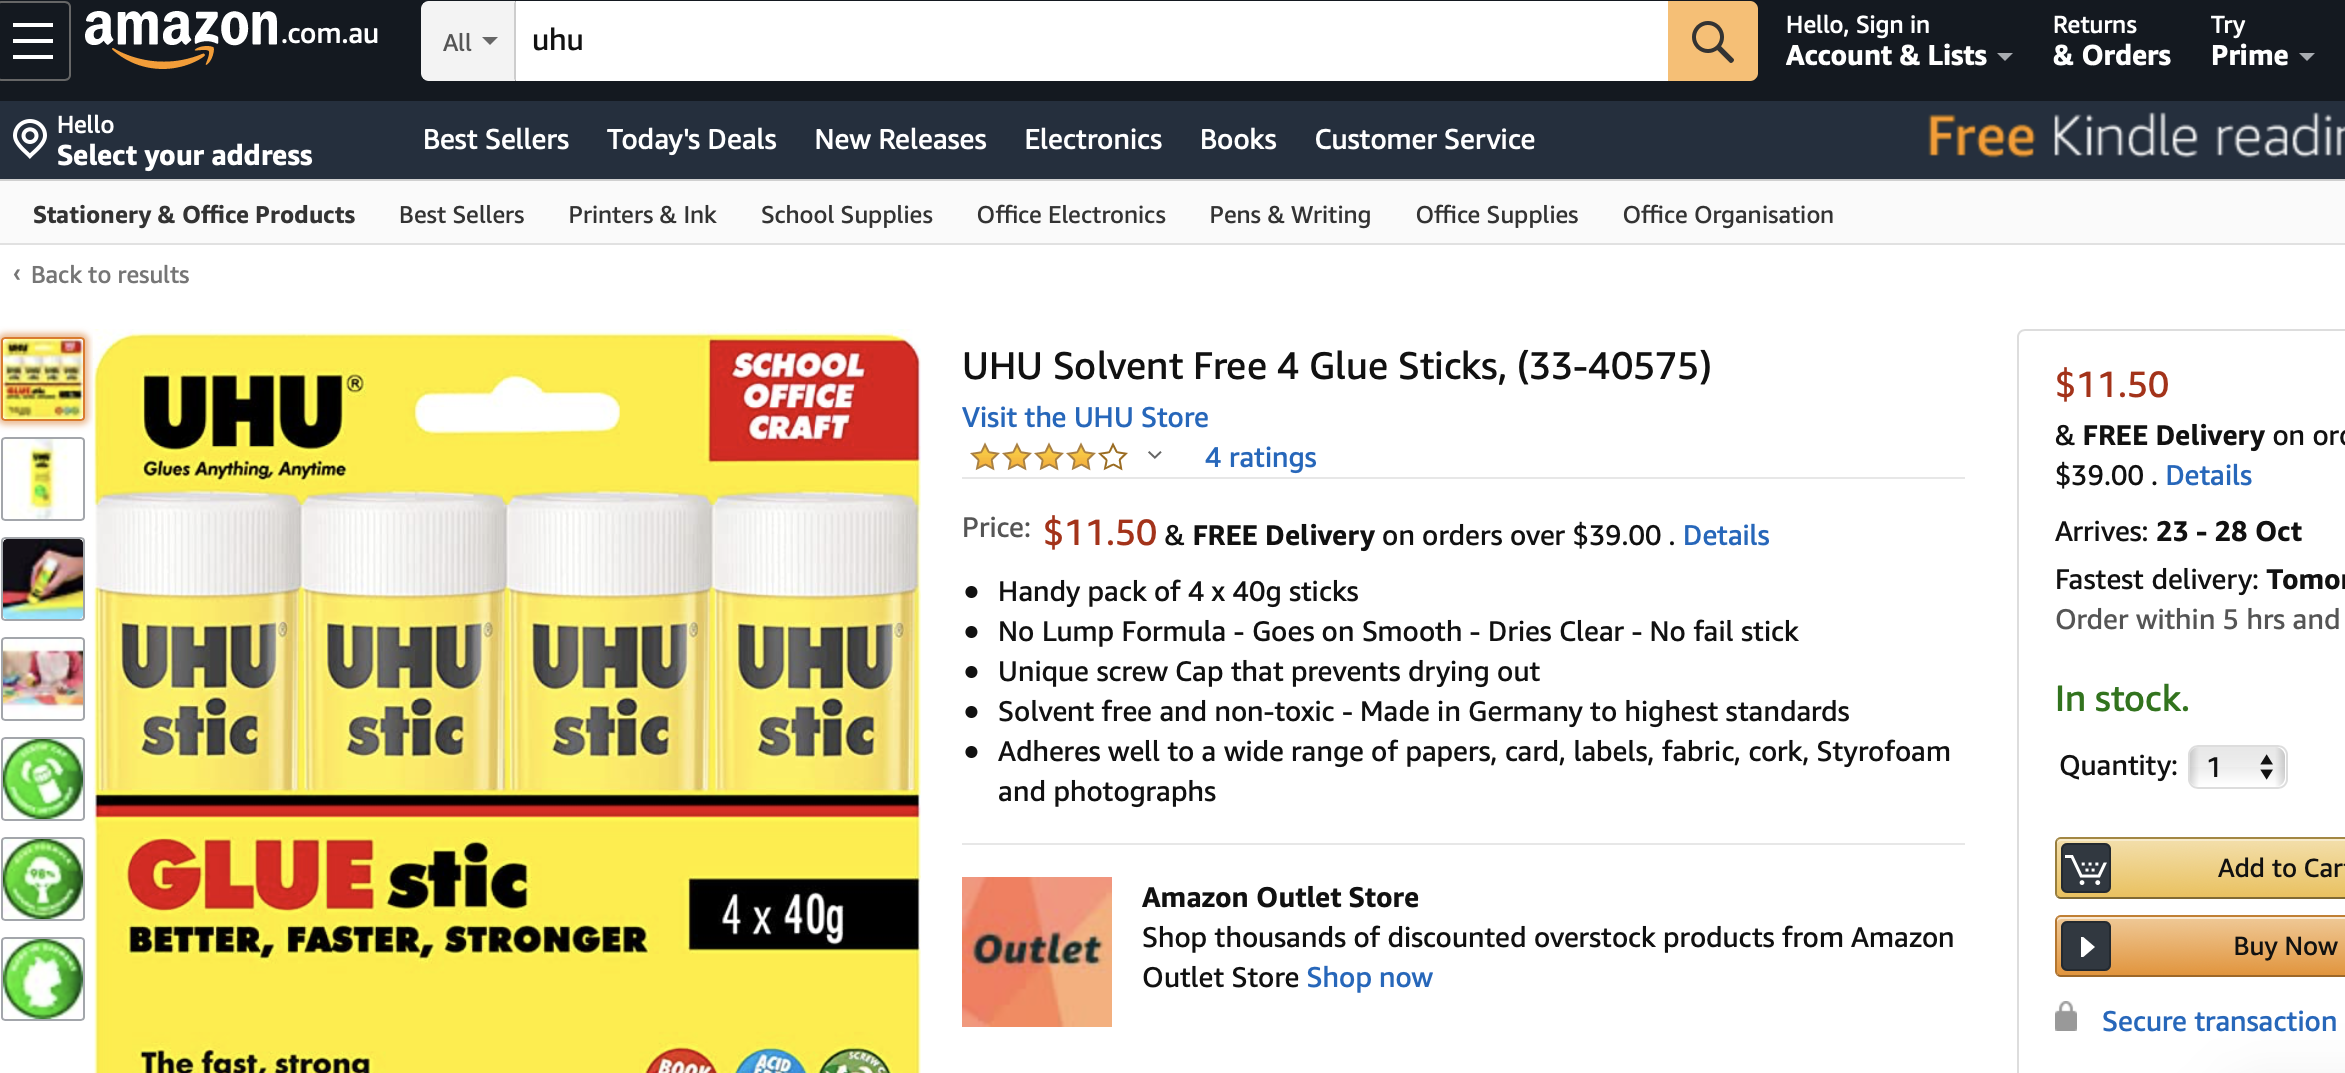 currently has the lowest price for UHU glue sticks